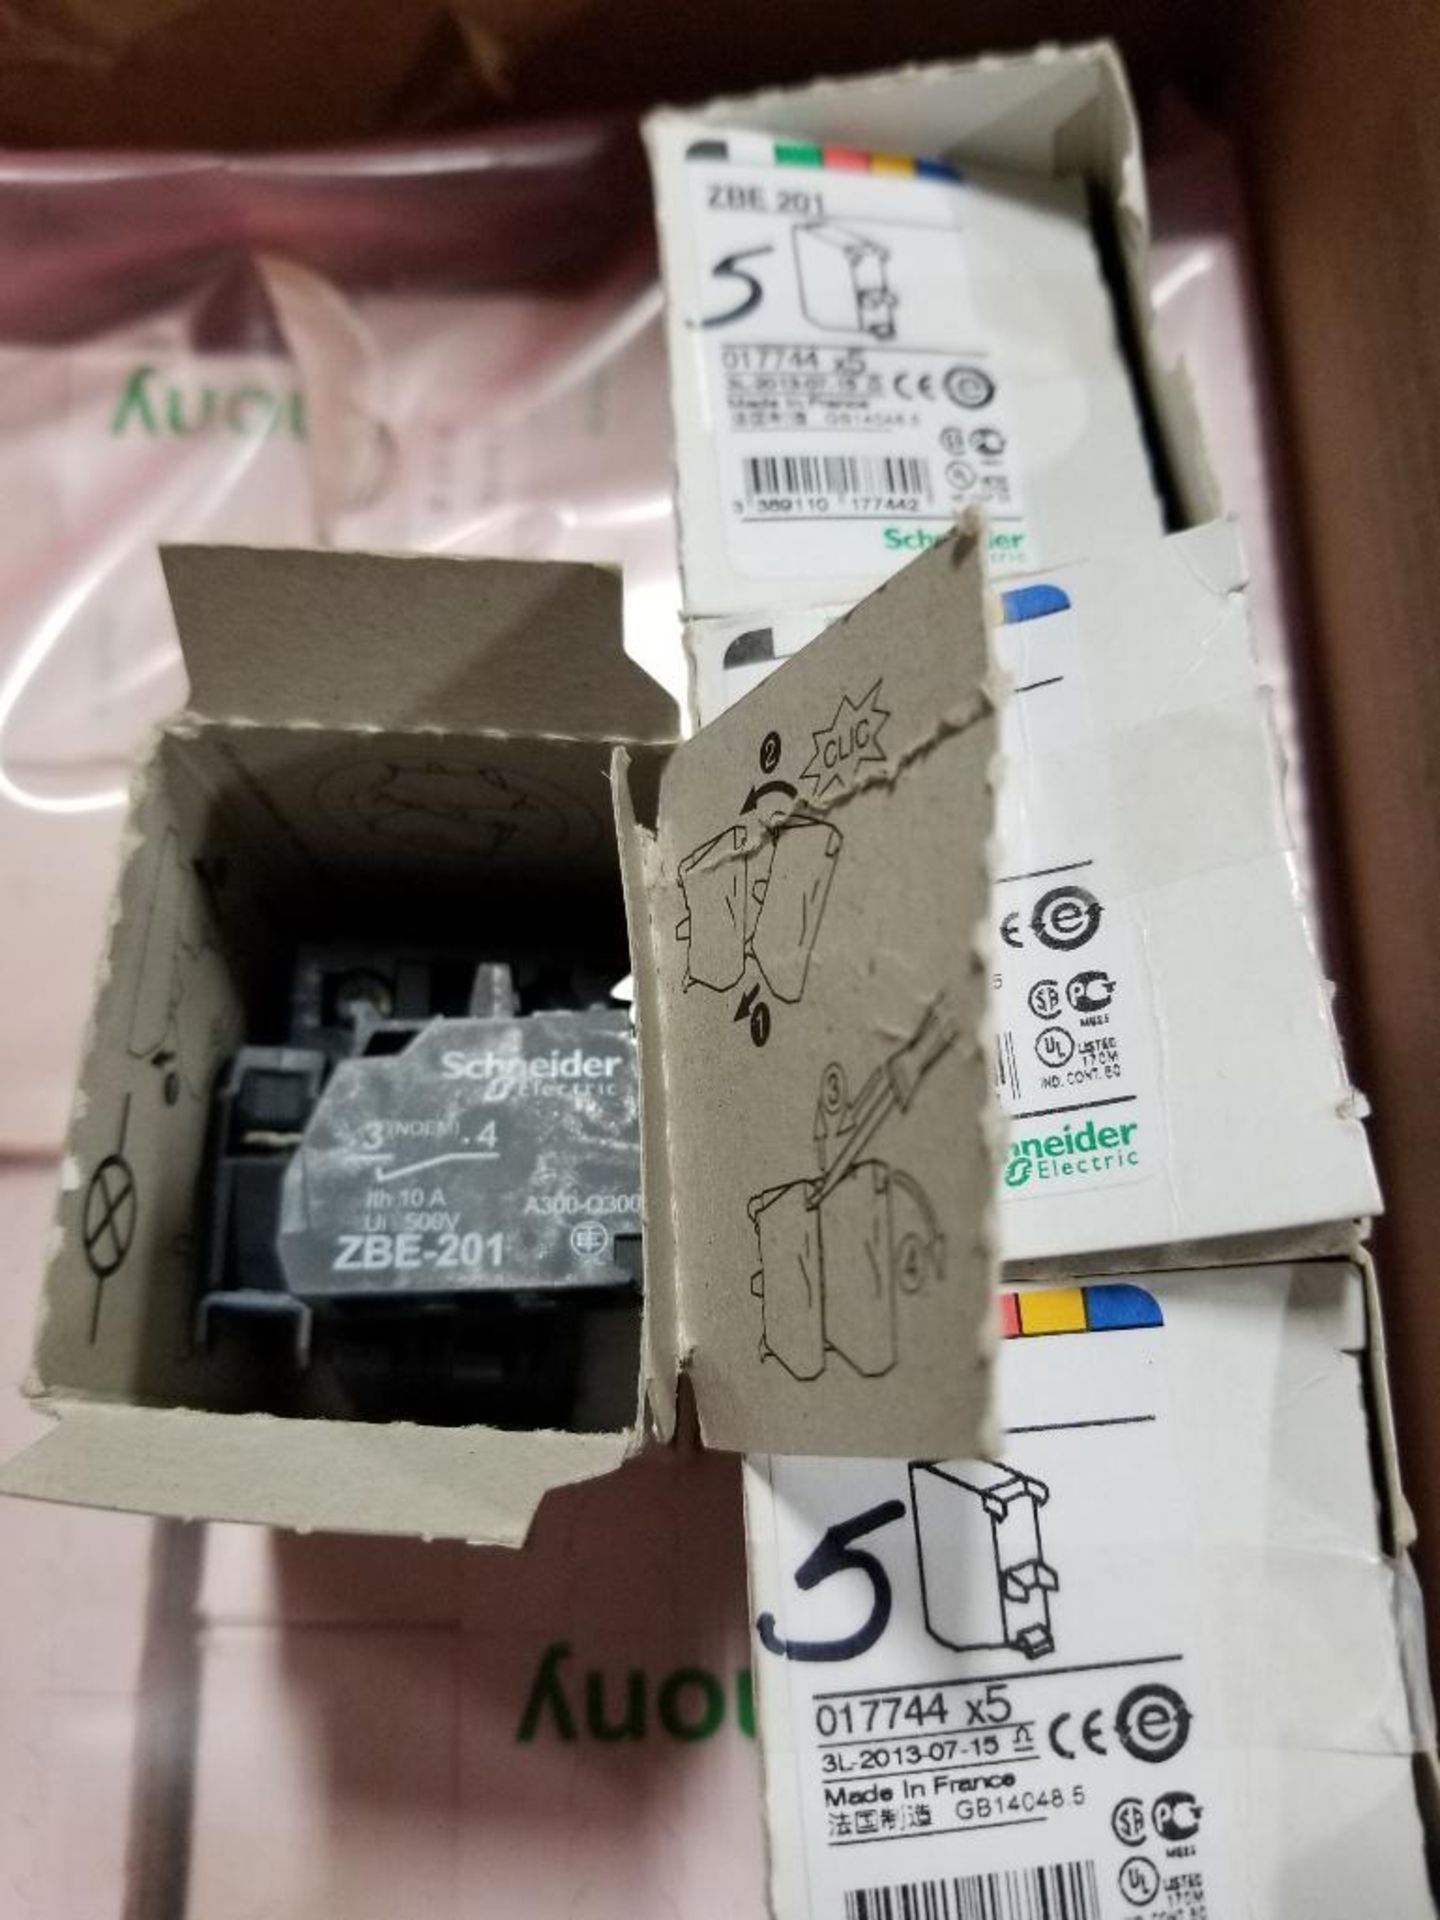 Qty 80 - Schneider electric. Part number 017744. New in bulk box. - Image 2 of 3